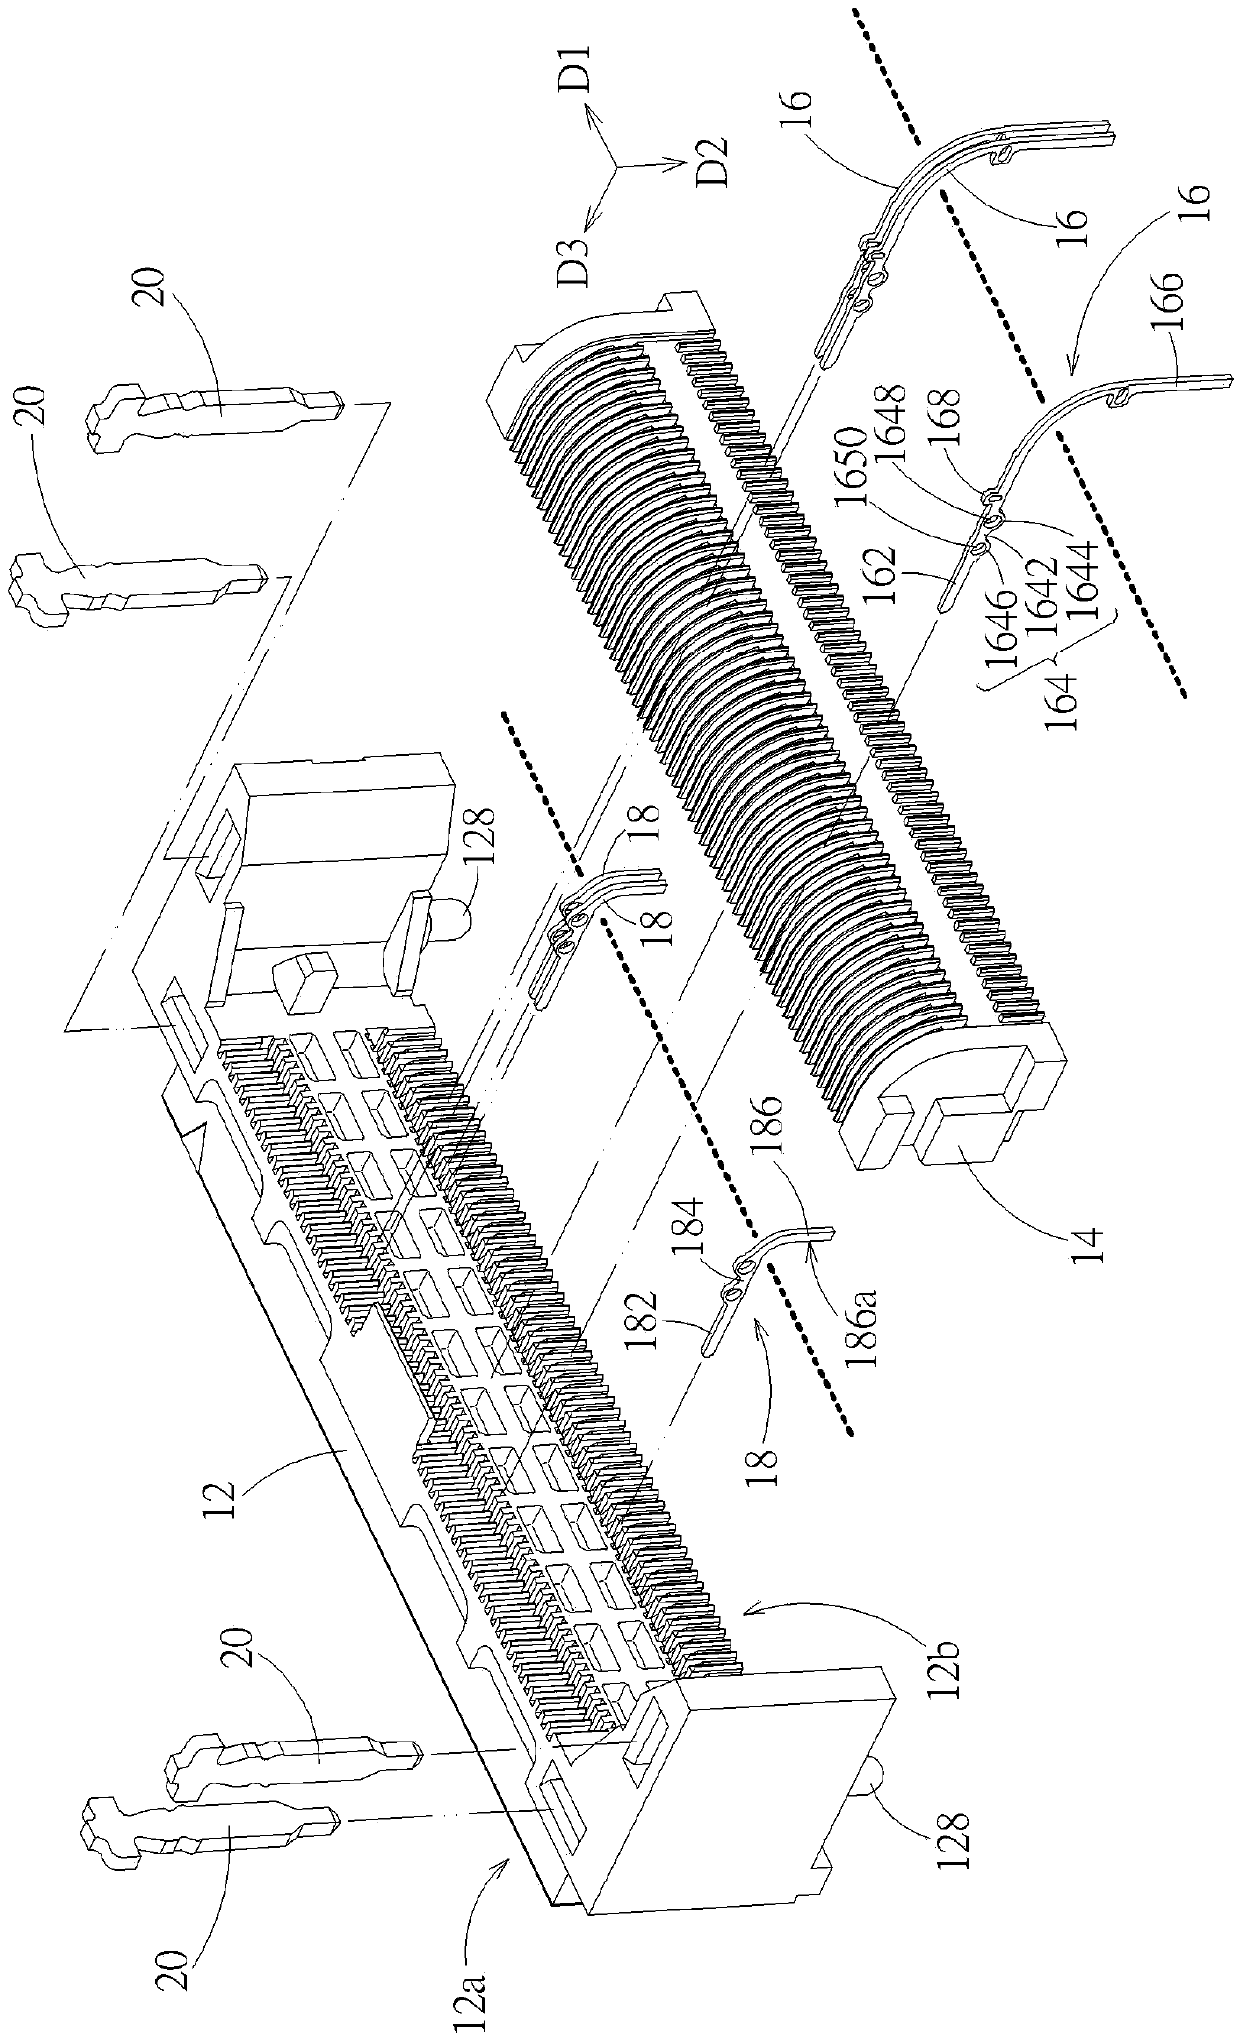 Electric connector and terminal thereof